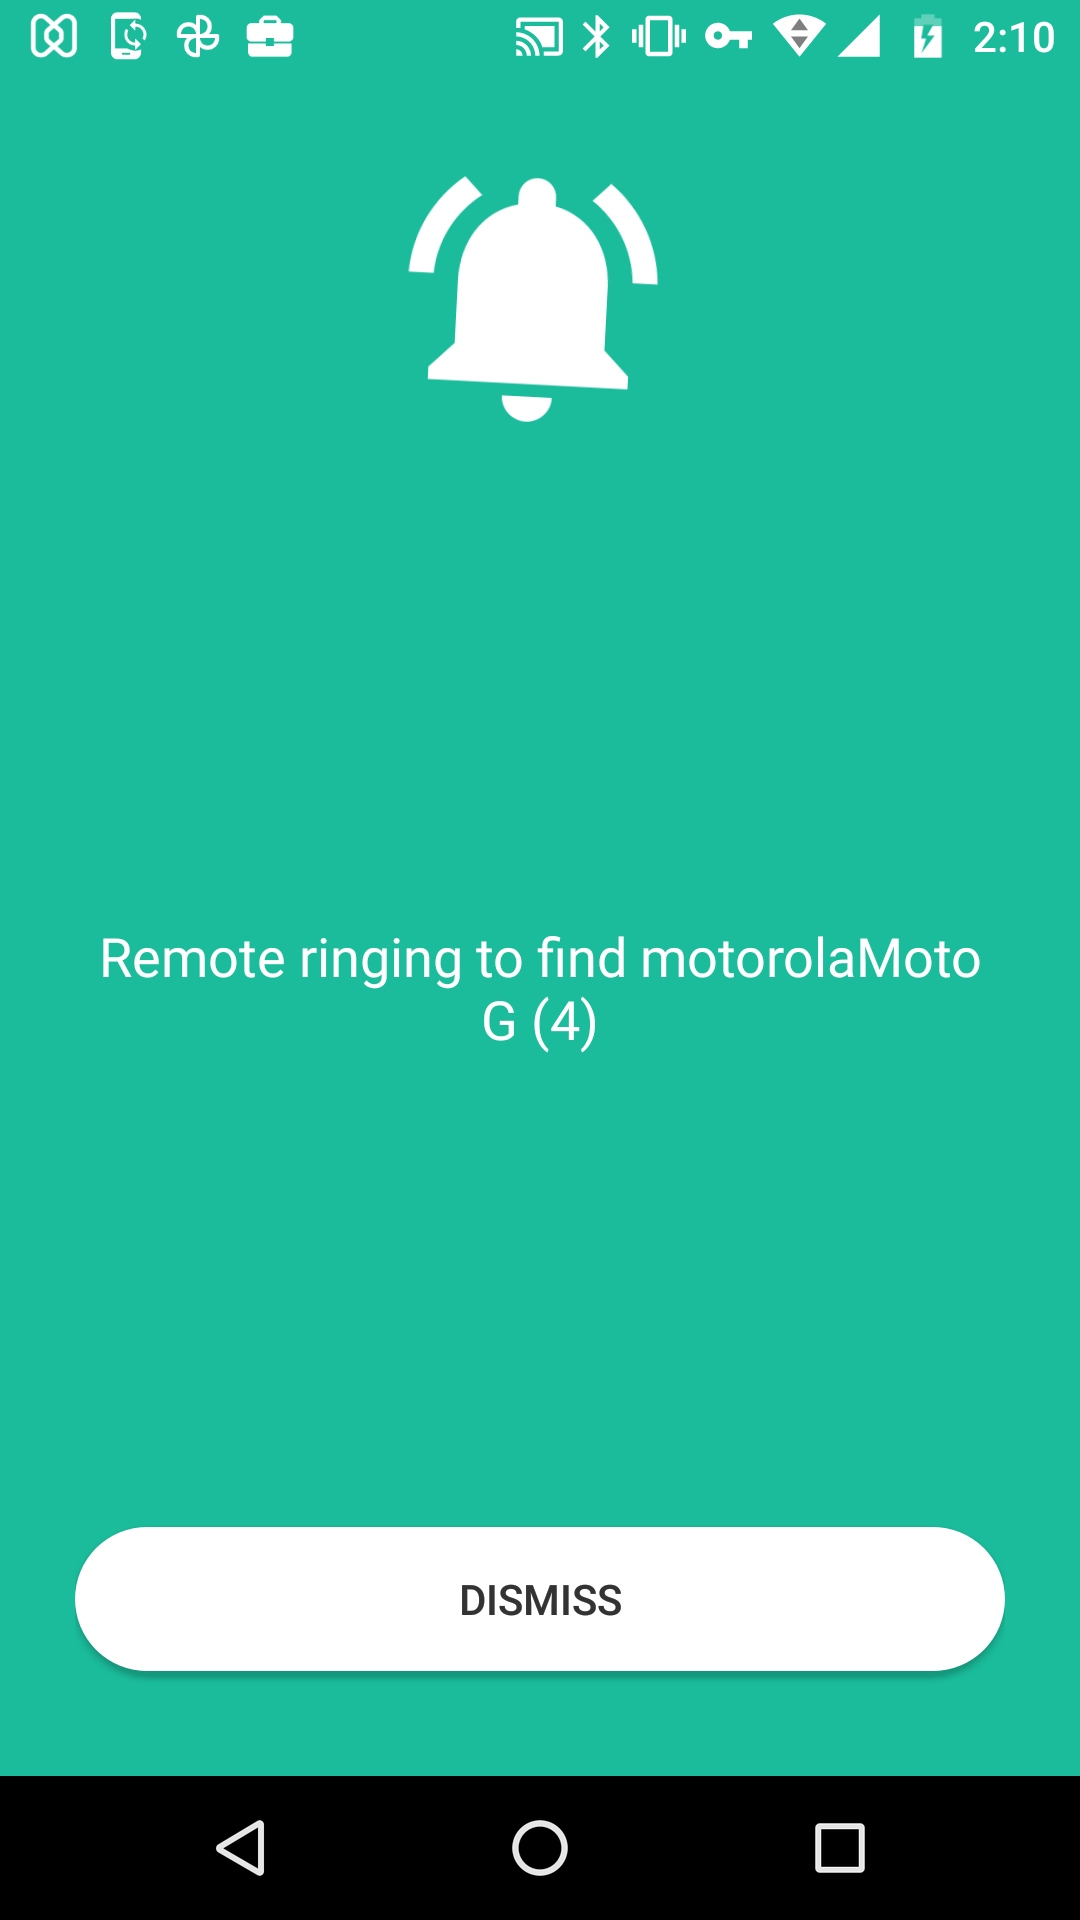 remote ring Android device using Hexnode MDM